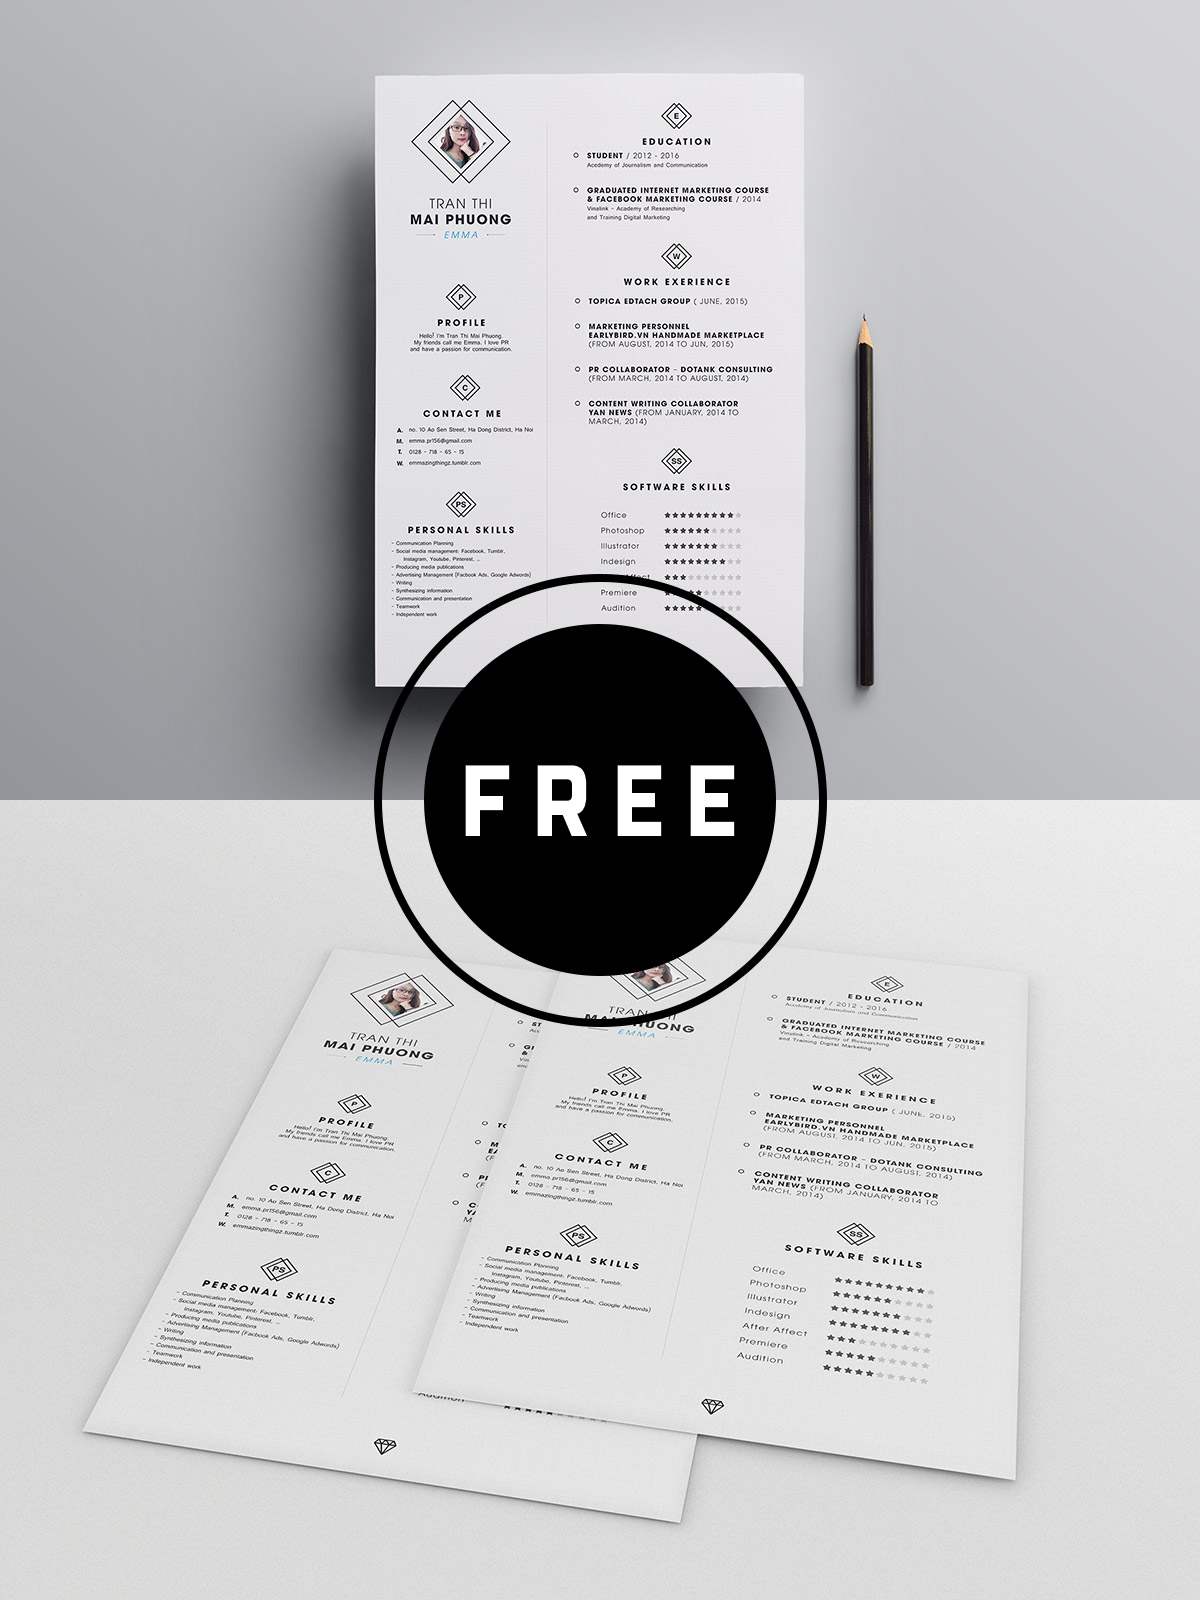 98 awesome free resume templates for 2019